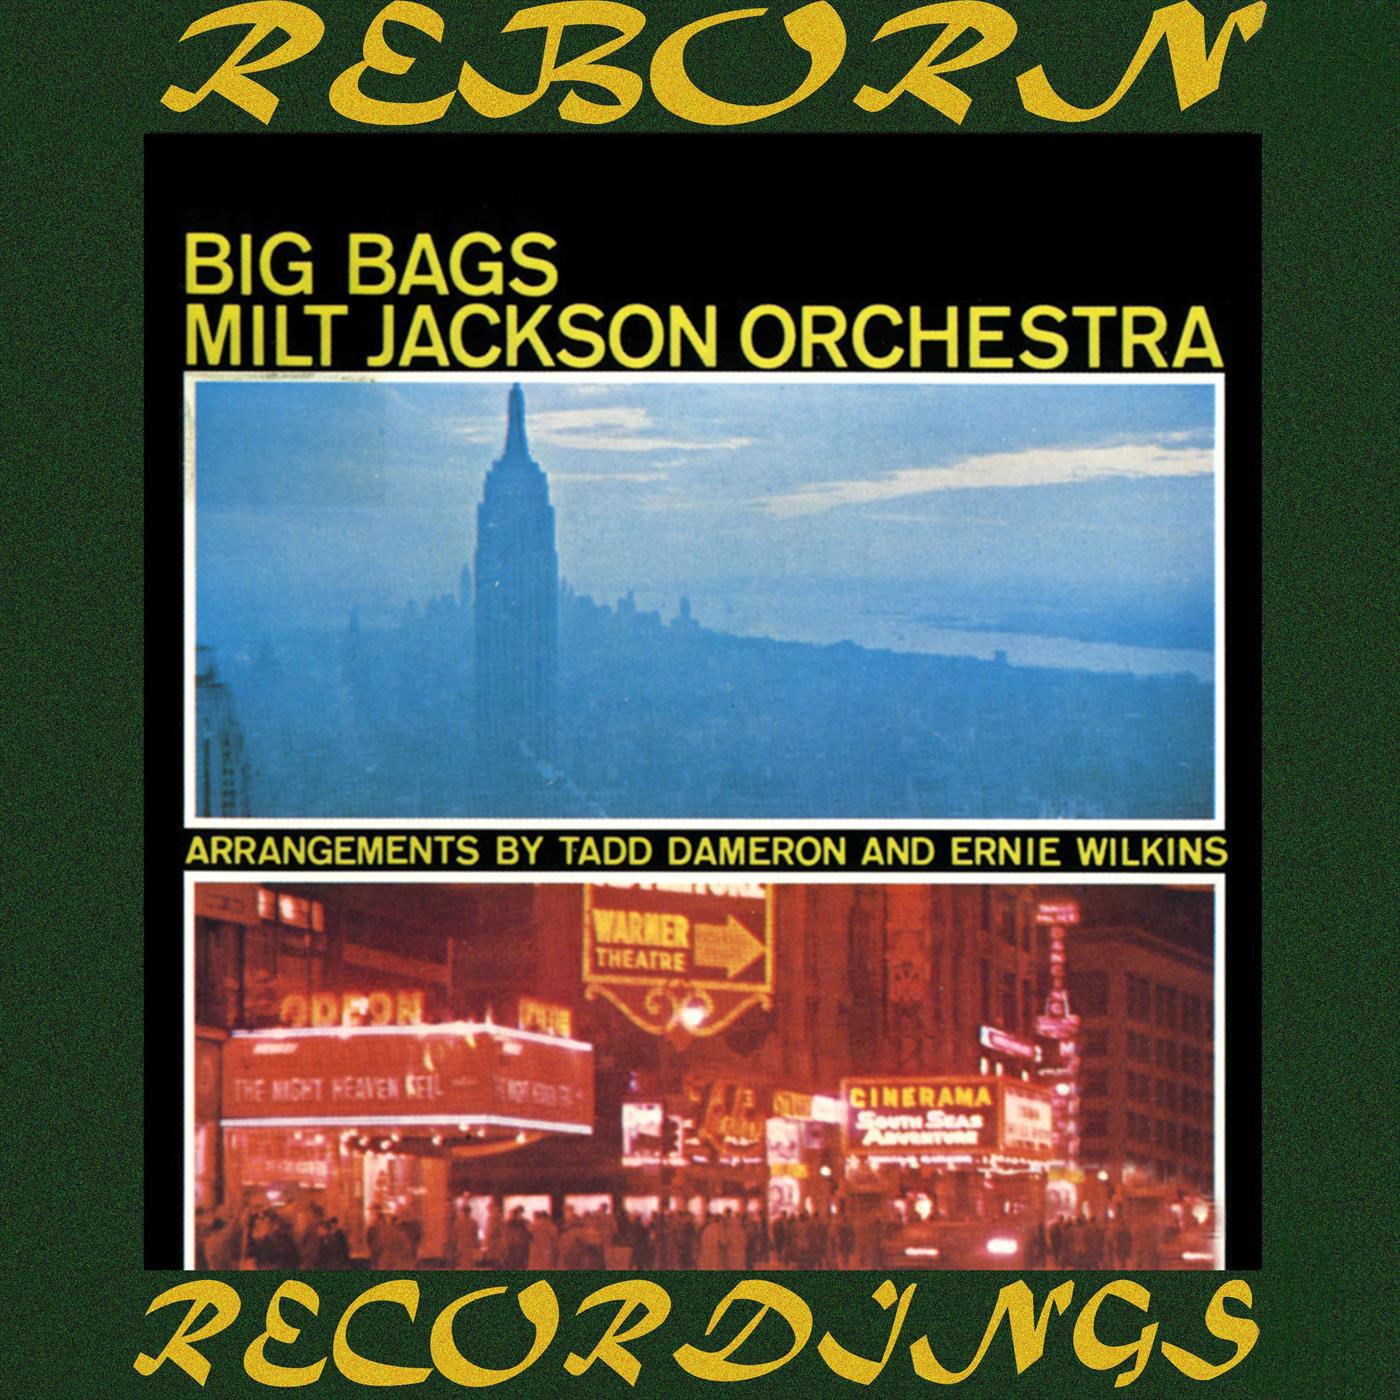 Big Bags, The Complete Sessions (HD Remastered)